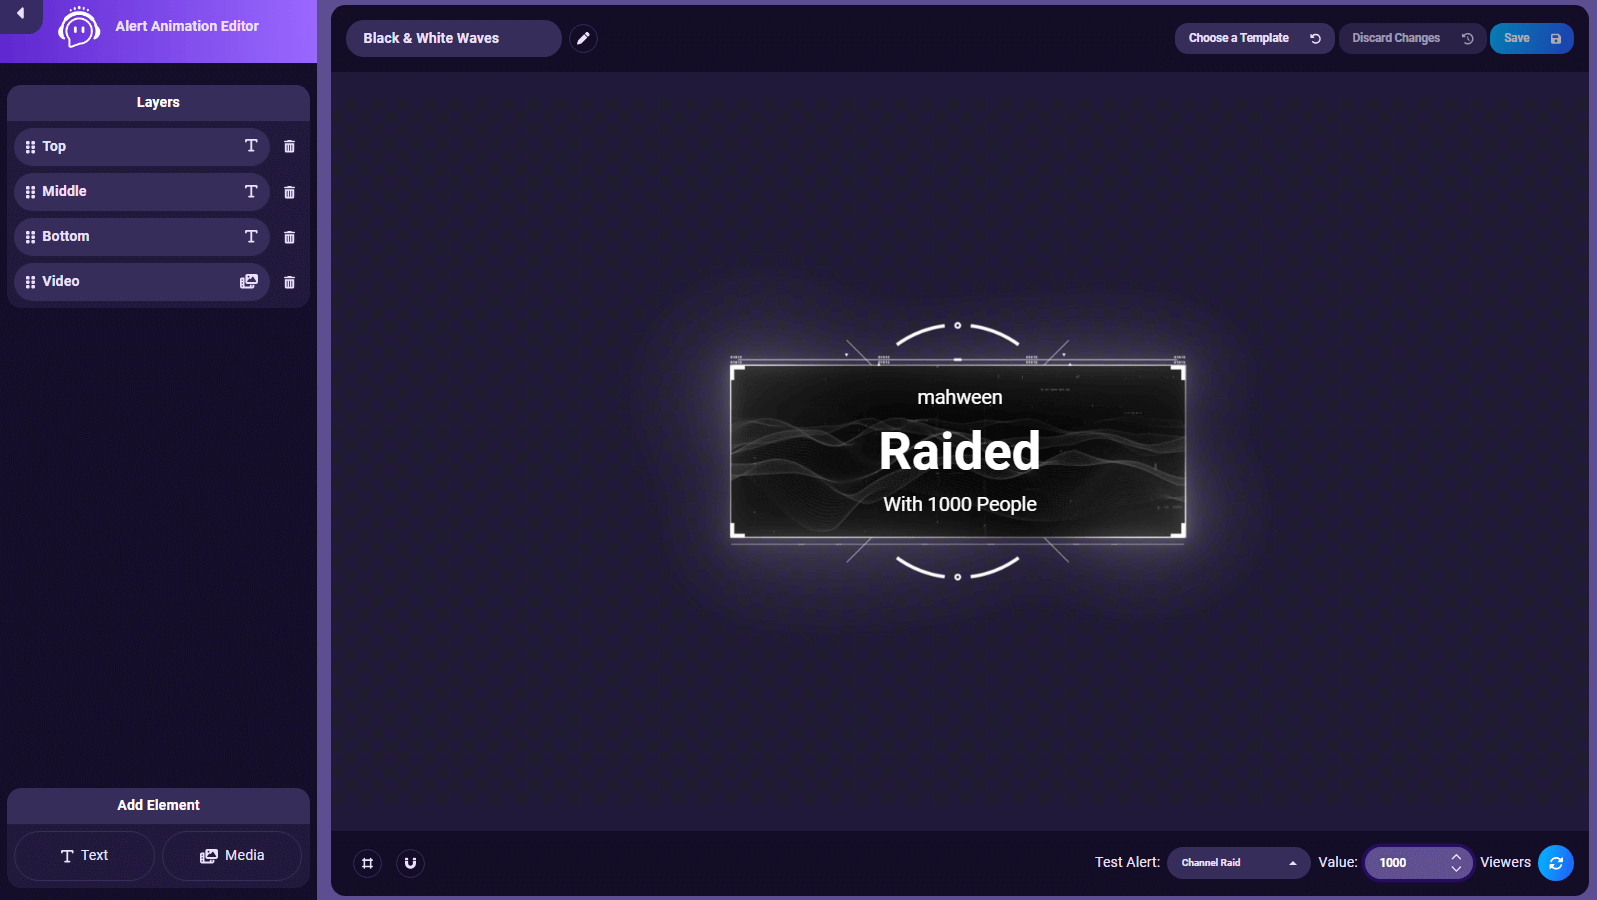 This image shows the alert animation editor of Sound Alerts with a raid alert for Twitch.